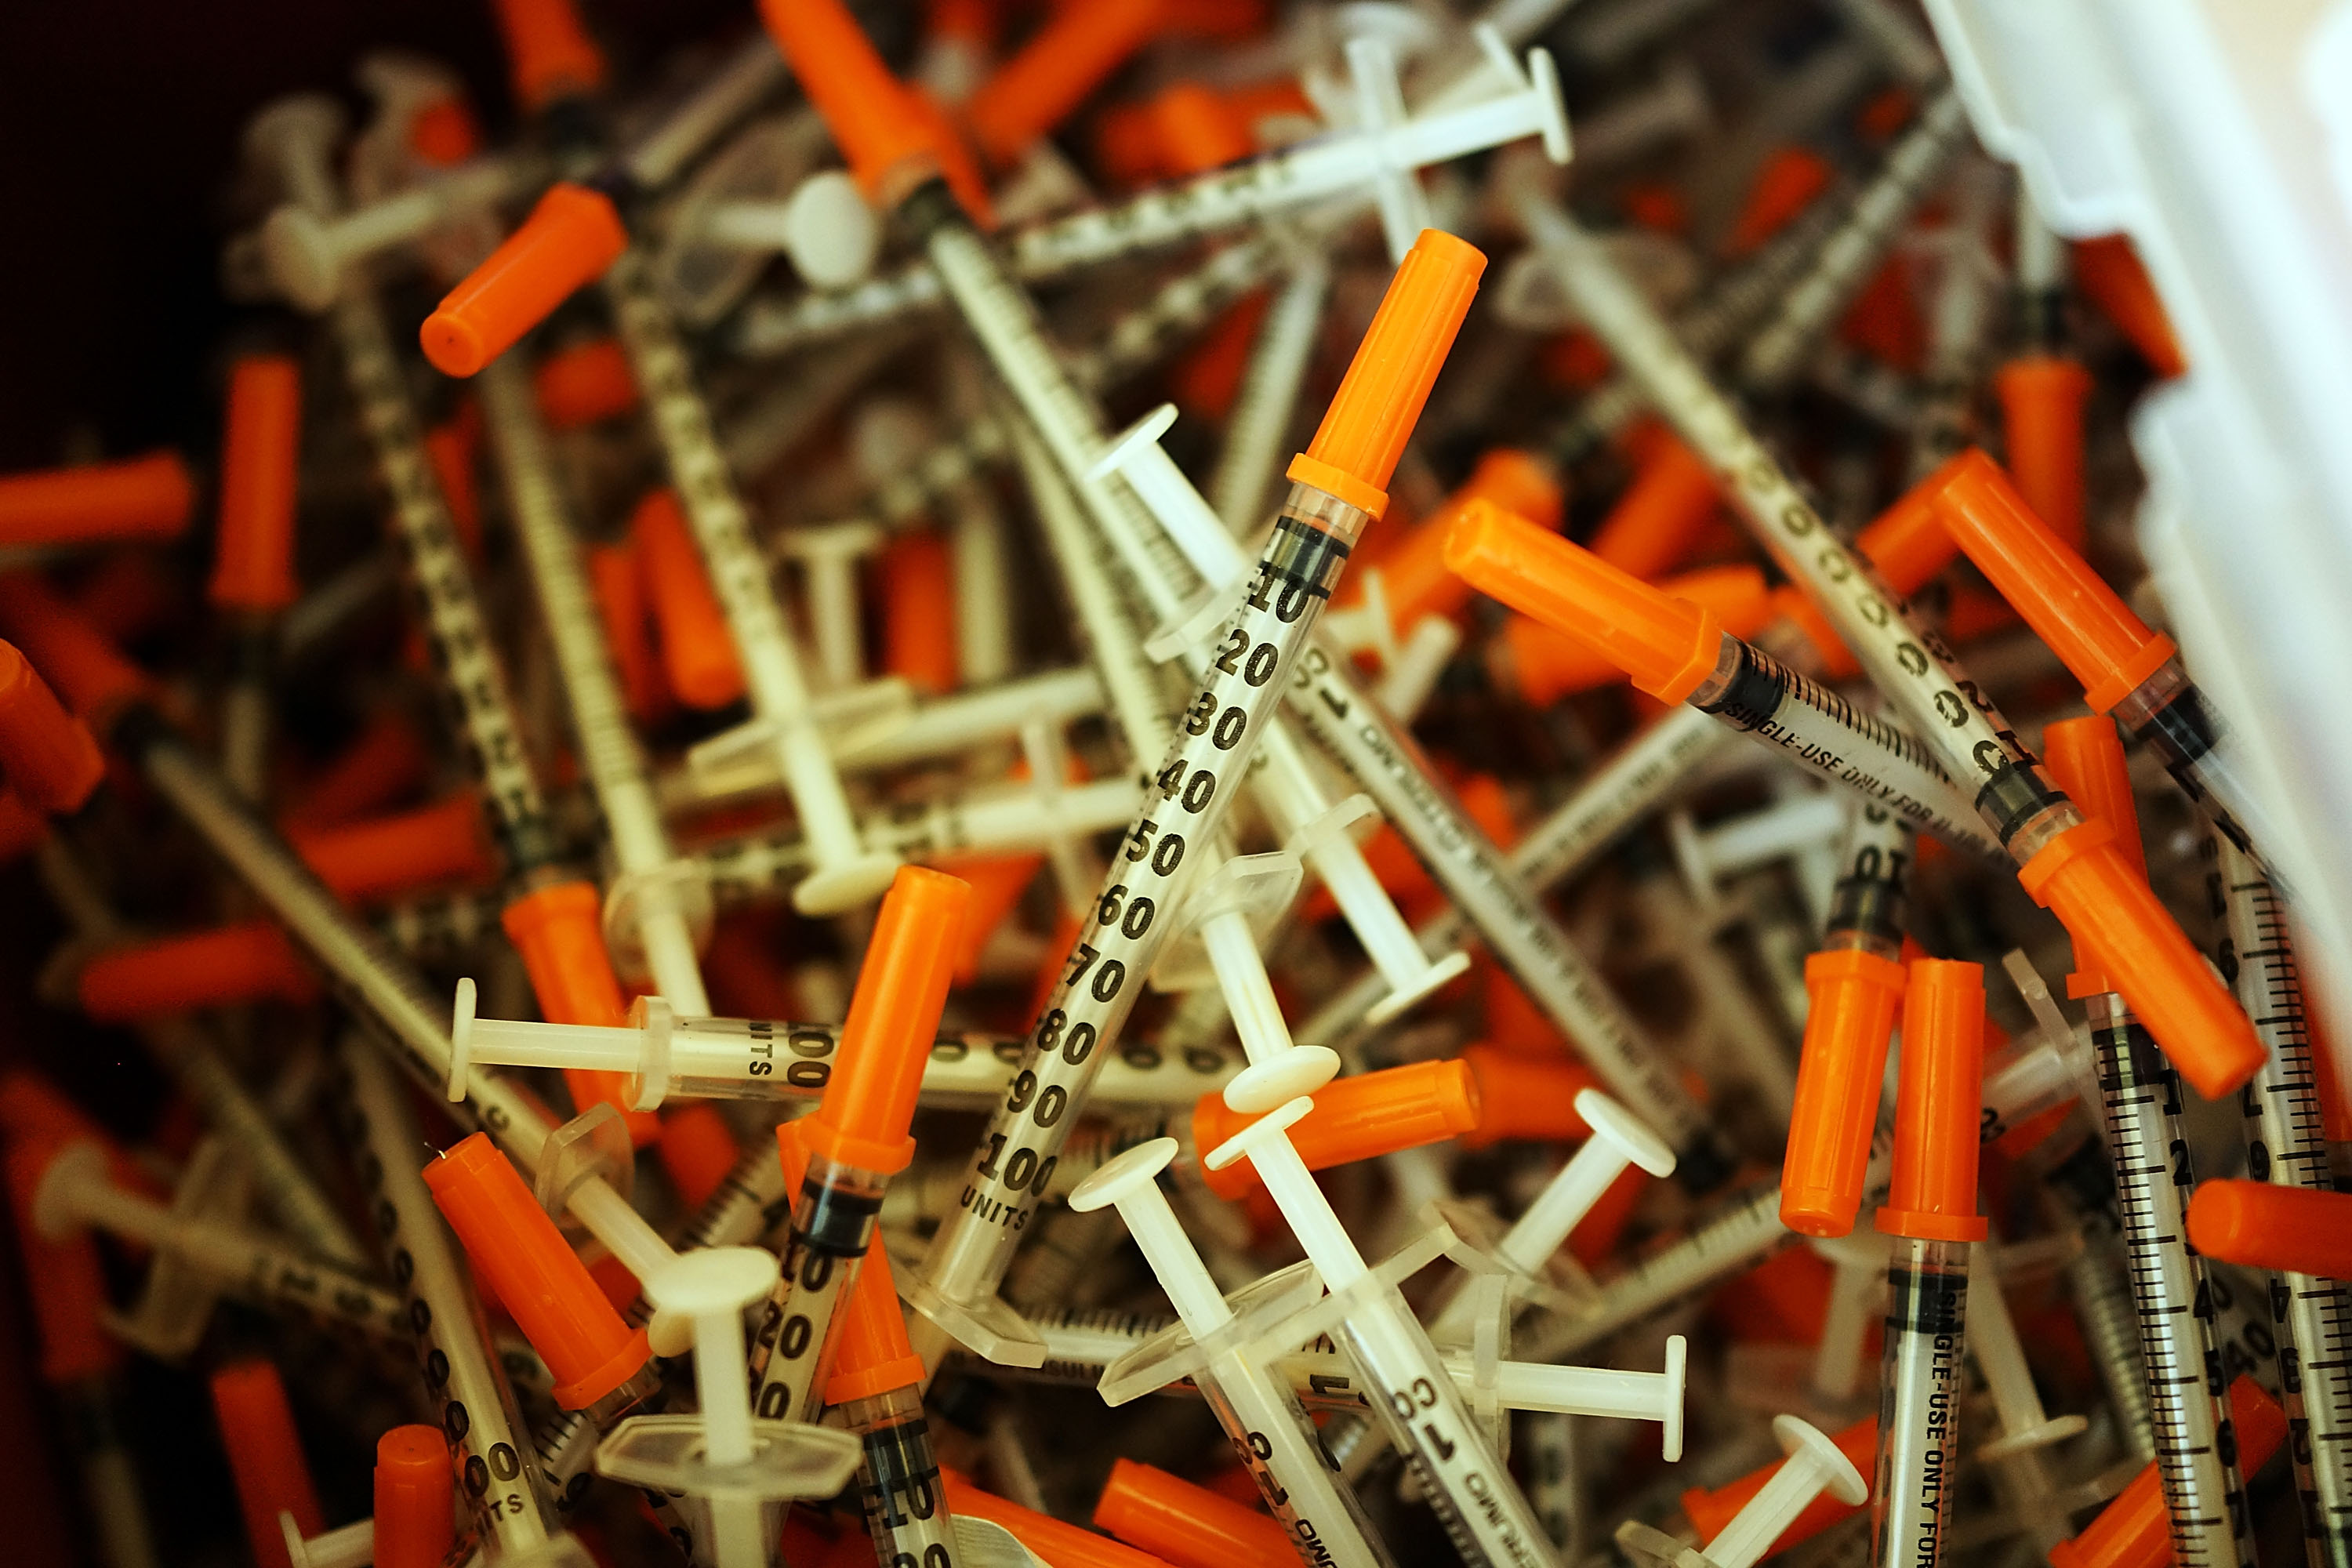 Used syringes are discarded at a needle exchange clinic in St. Johnsbury, Vermont. (Spencer Platt—Getty Images)